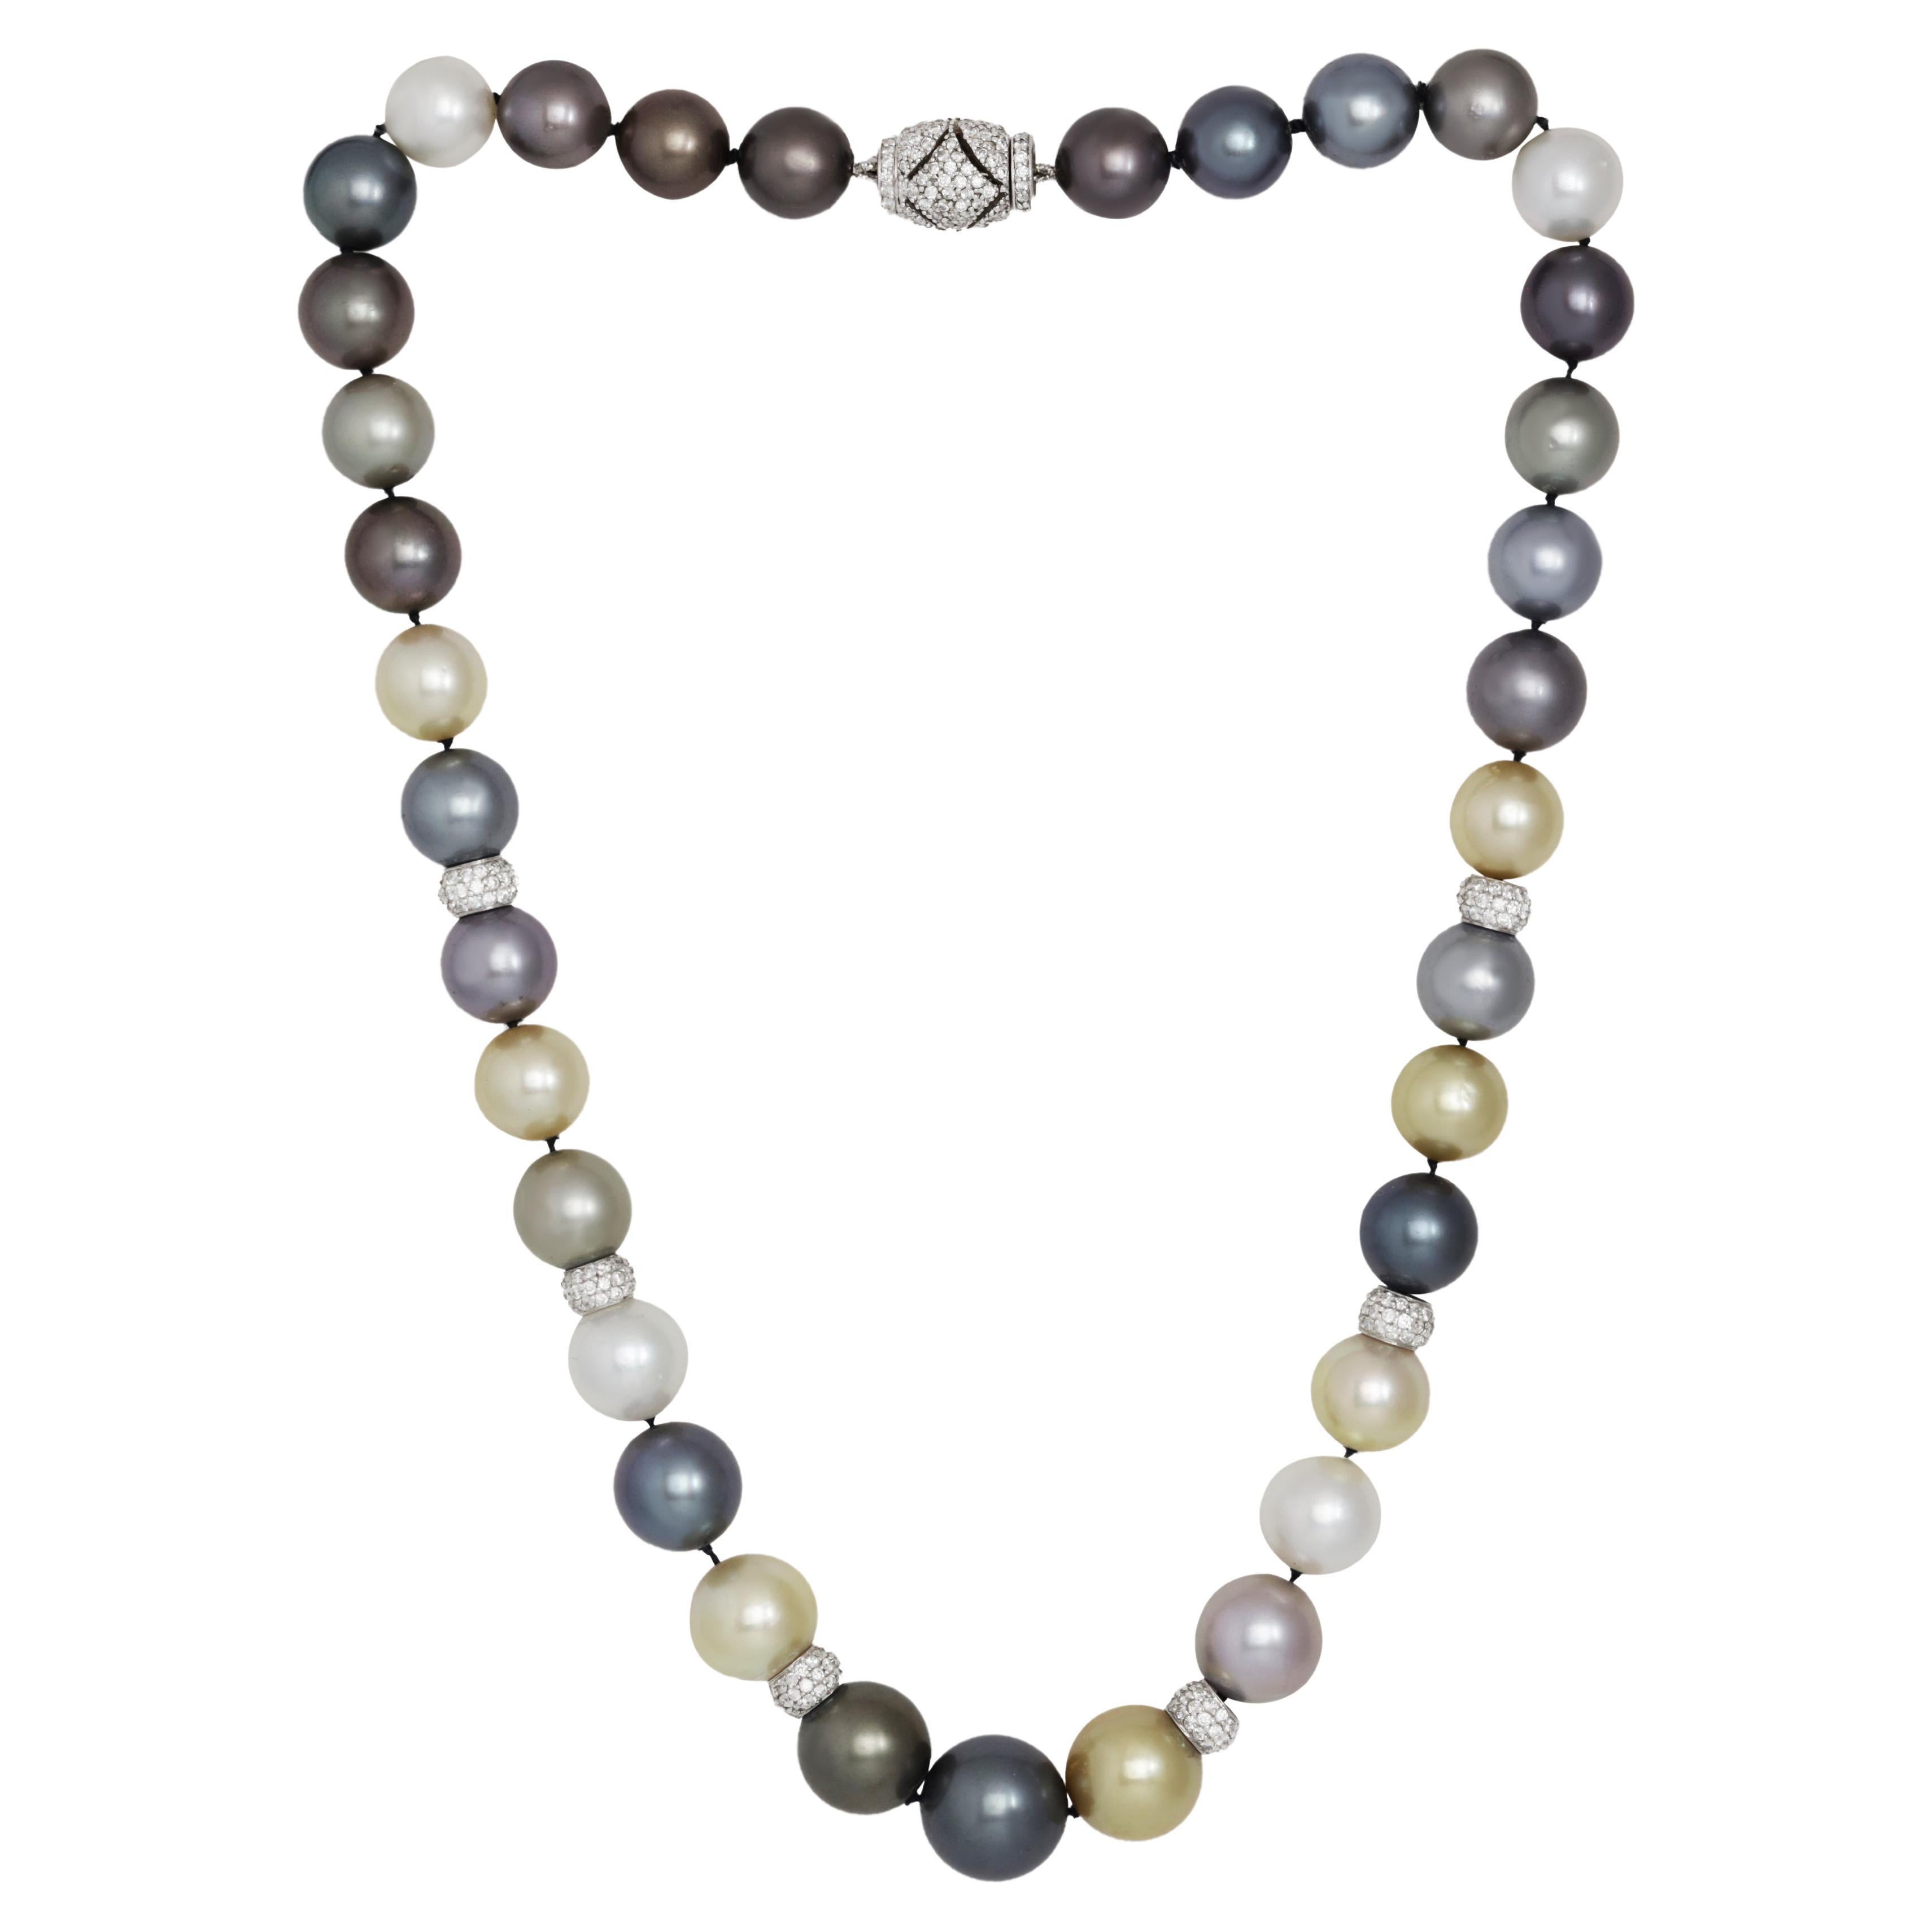 Diana M. Diamond pearl necklace adorned with 10-14 mm Tahitian south sea pearls  For Sale